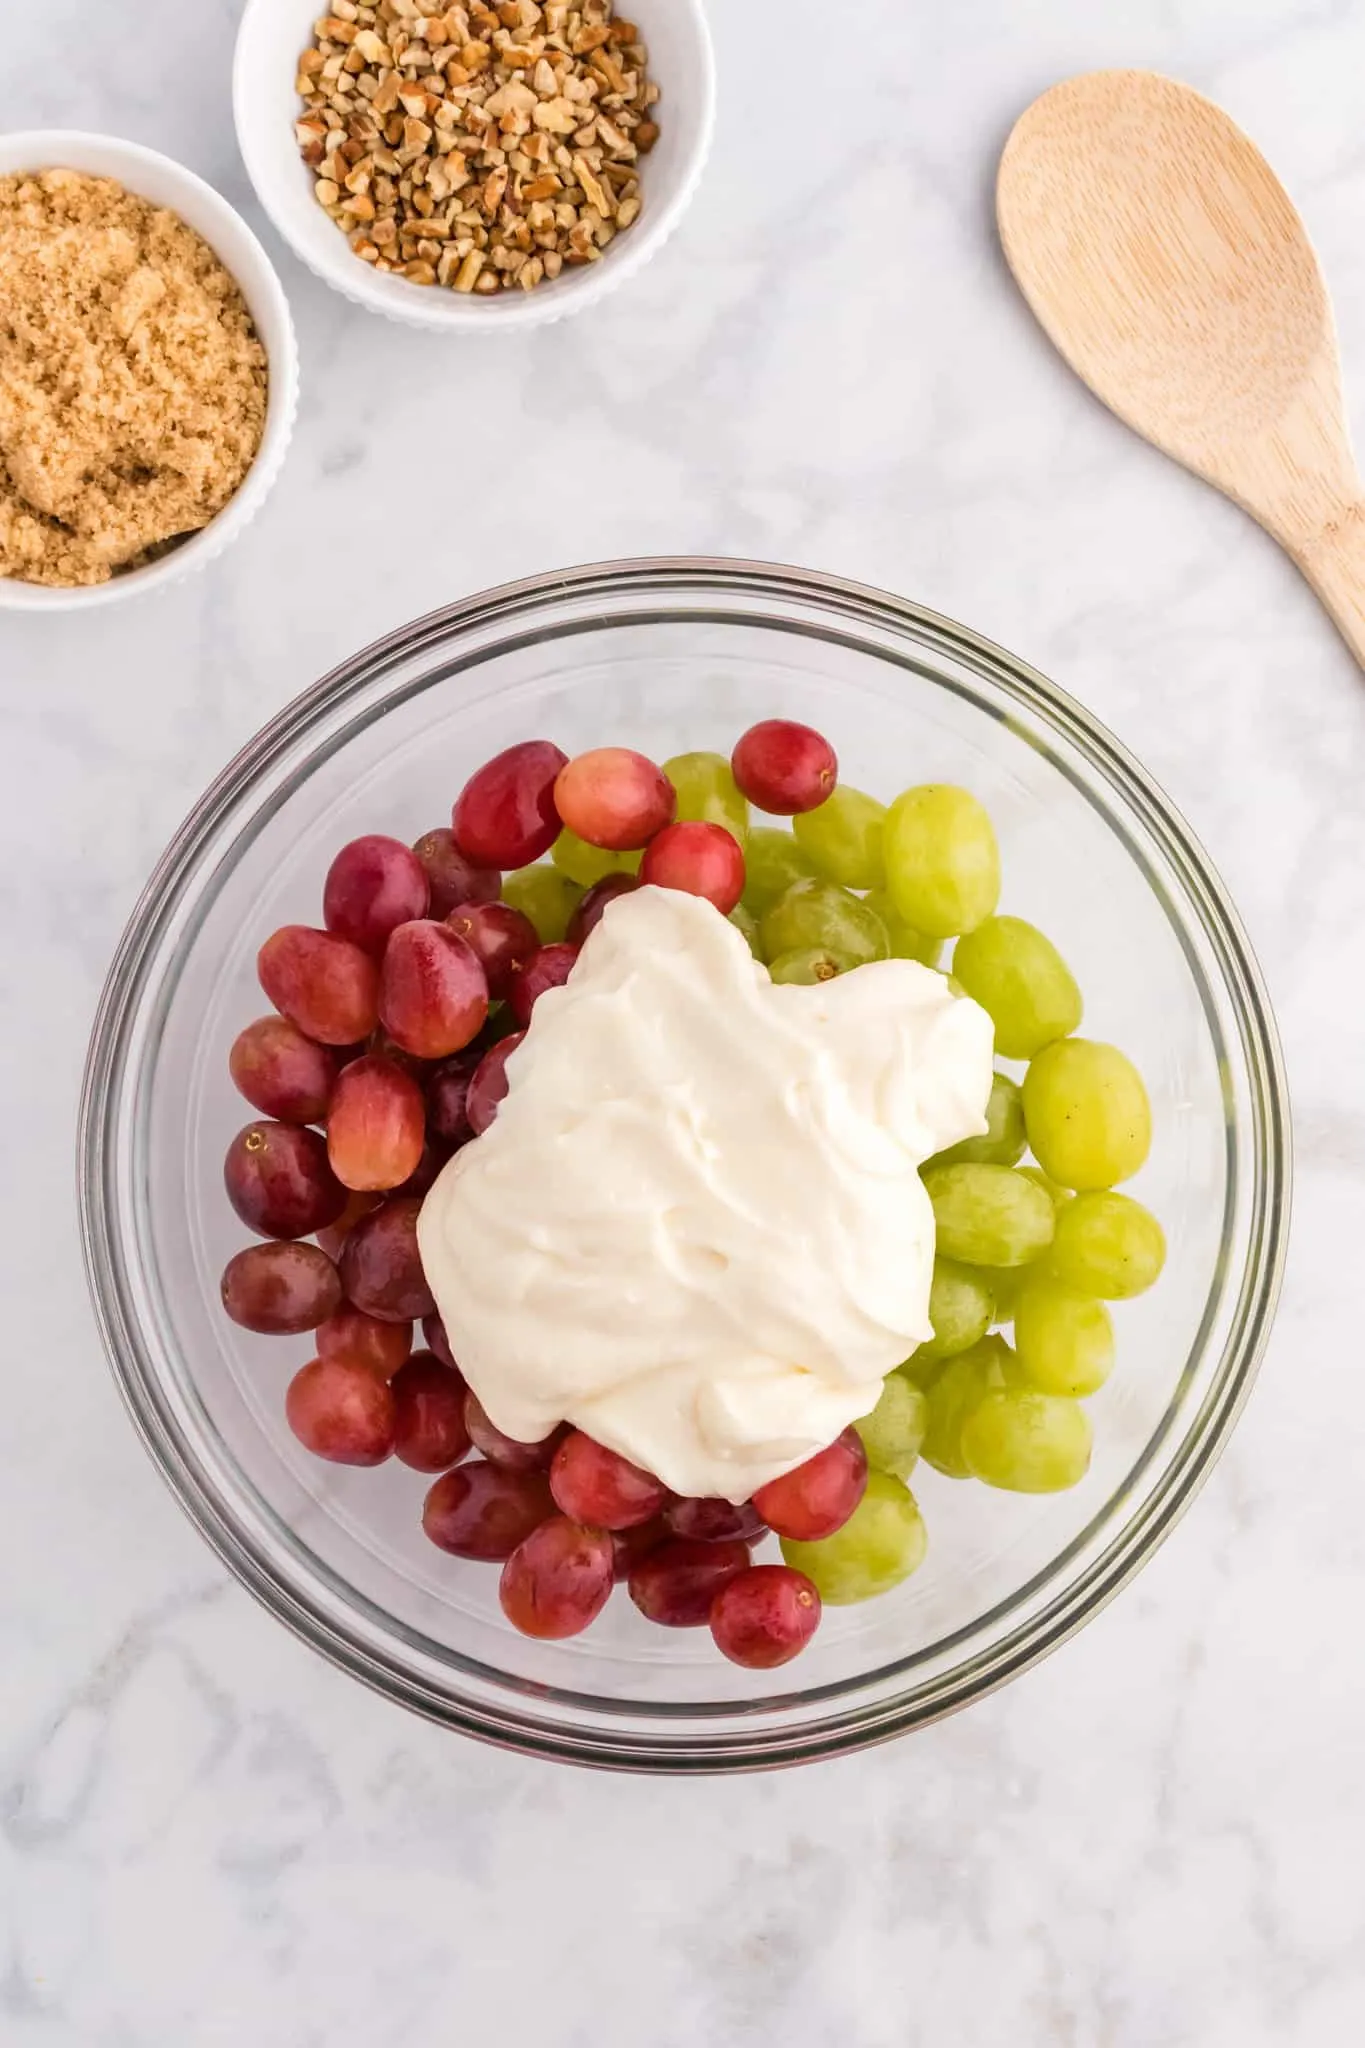 cream cheese and yogurt mixture on top of grapes in a bwol